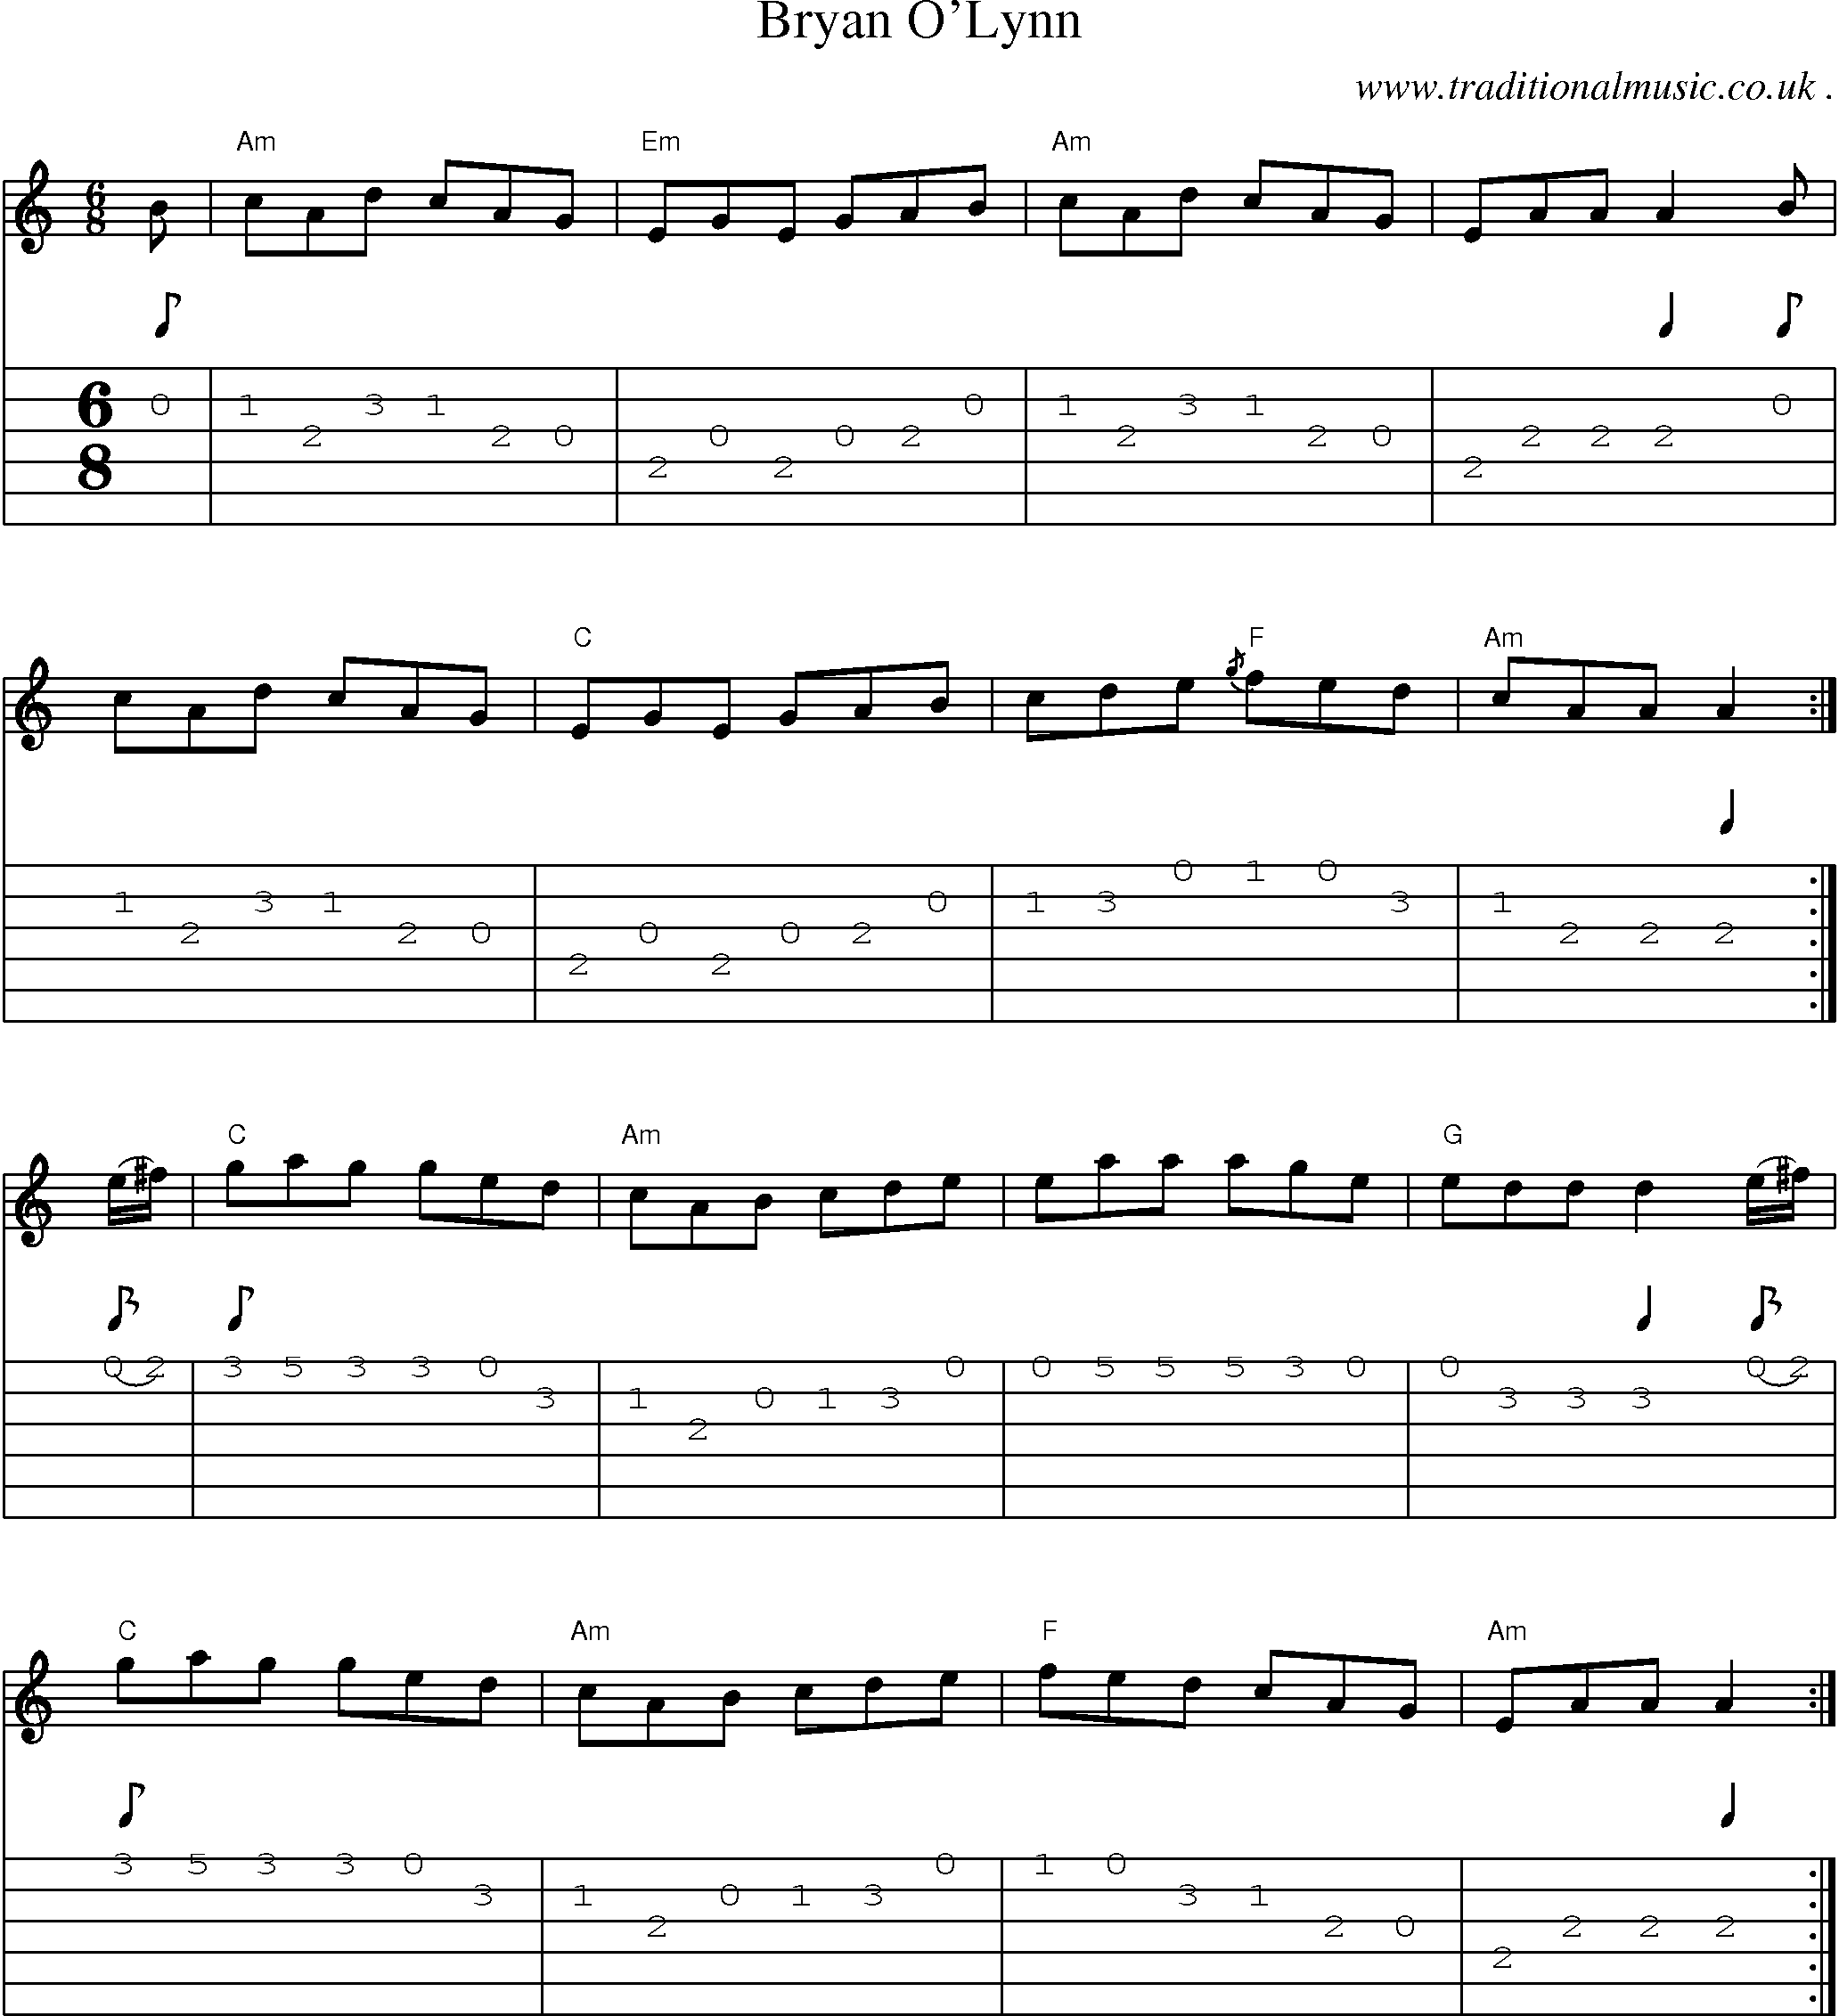 Music Score and Guitar Tabs for Bryan Olynn